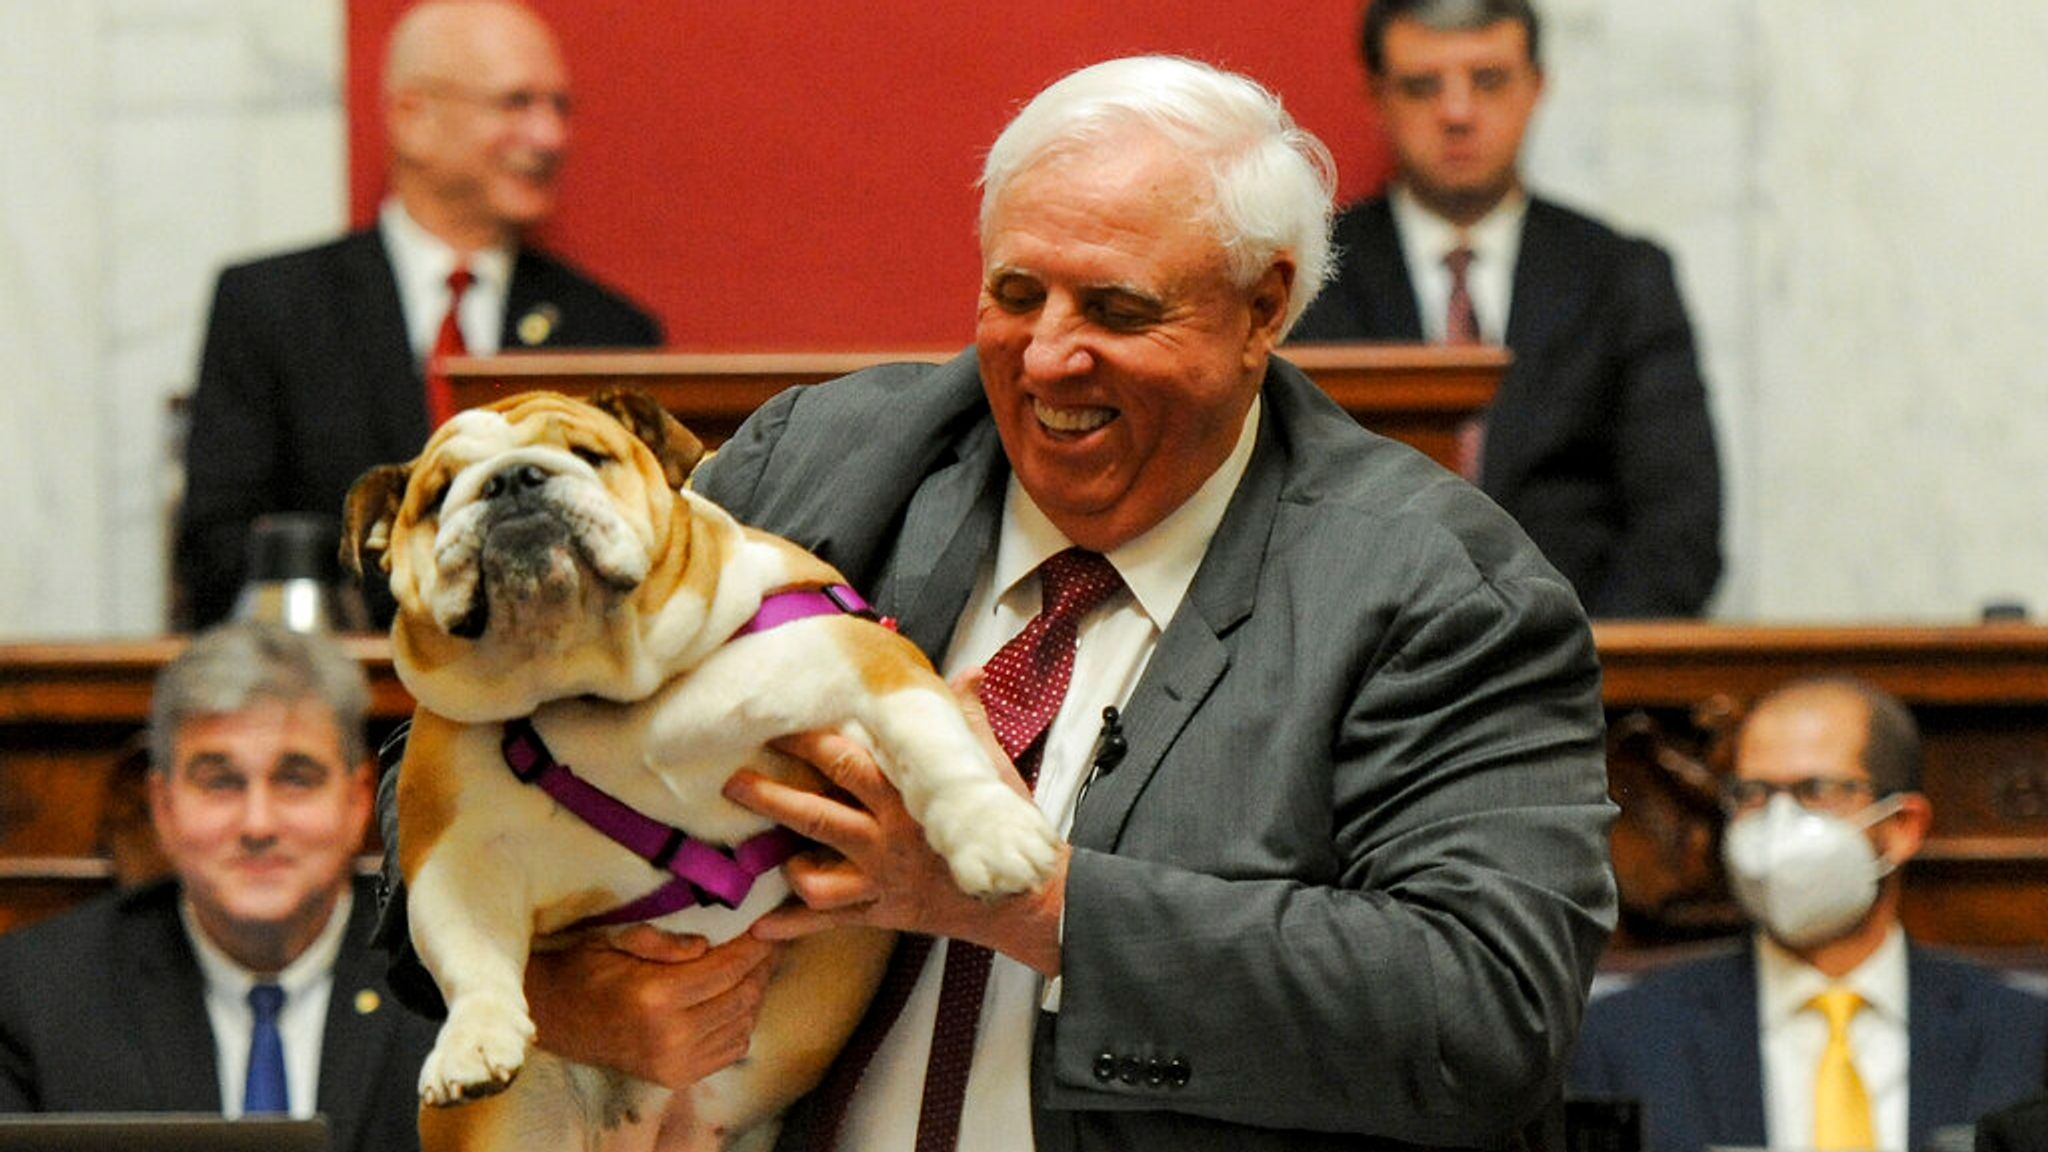 Jim Justice, left, poses with his dog Babydog, right